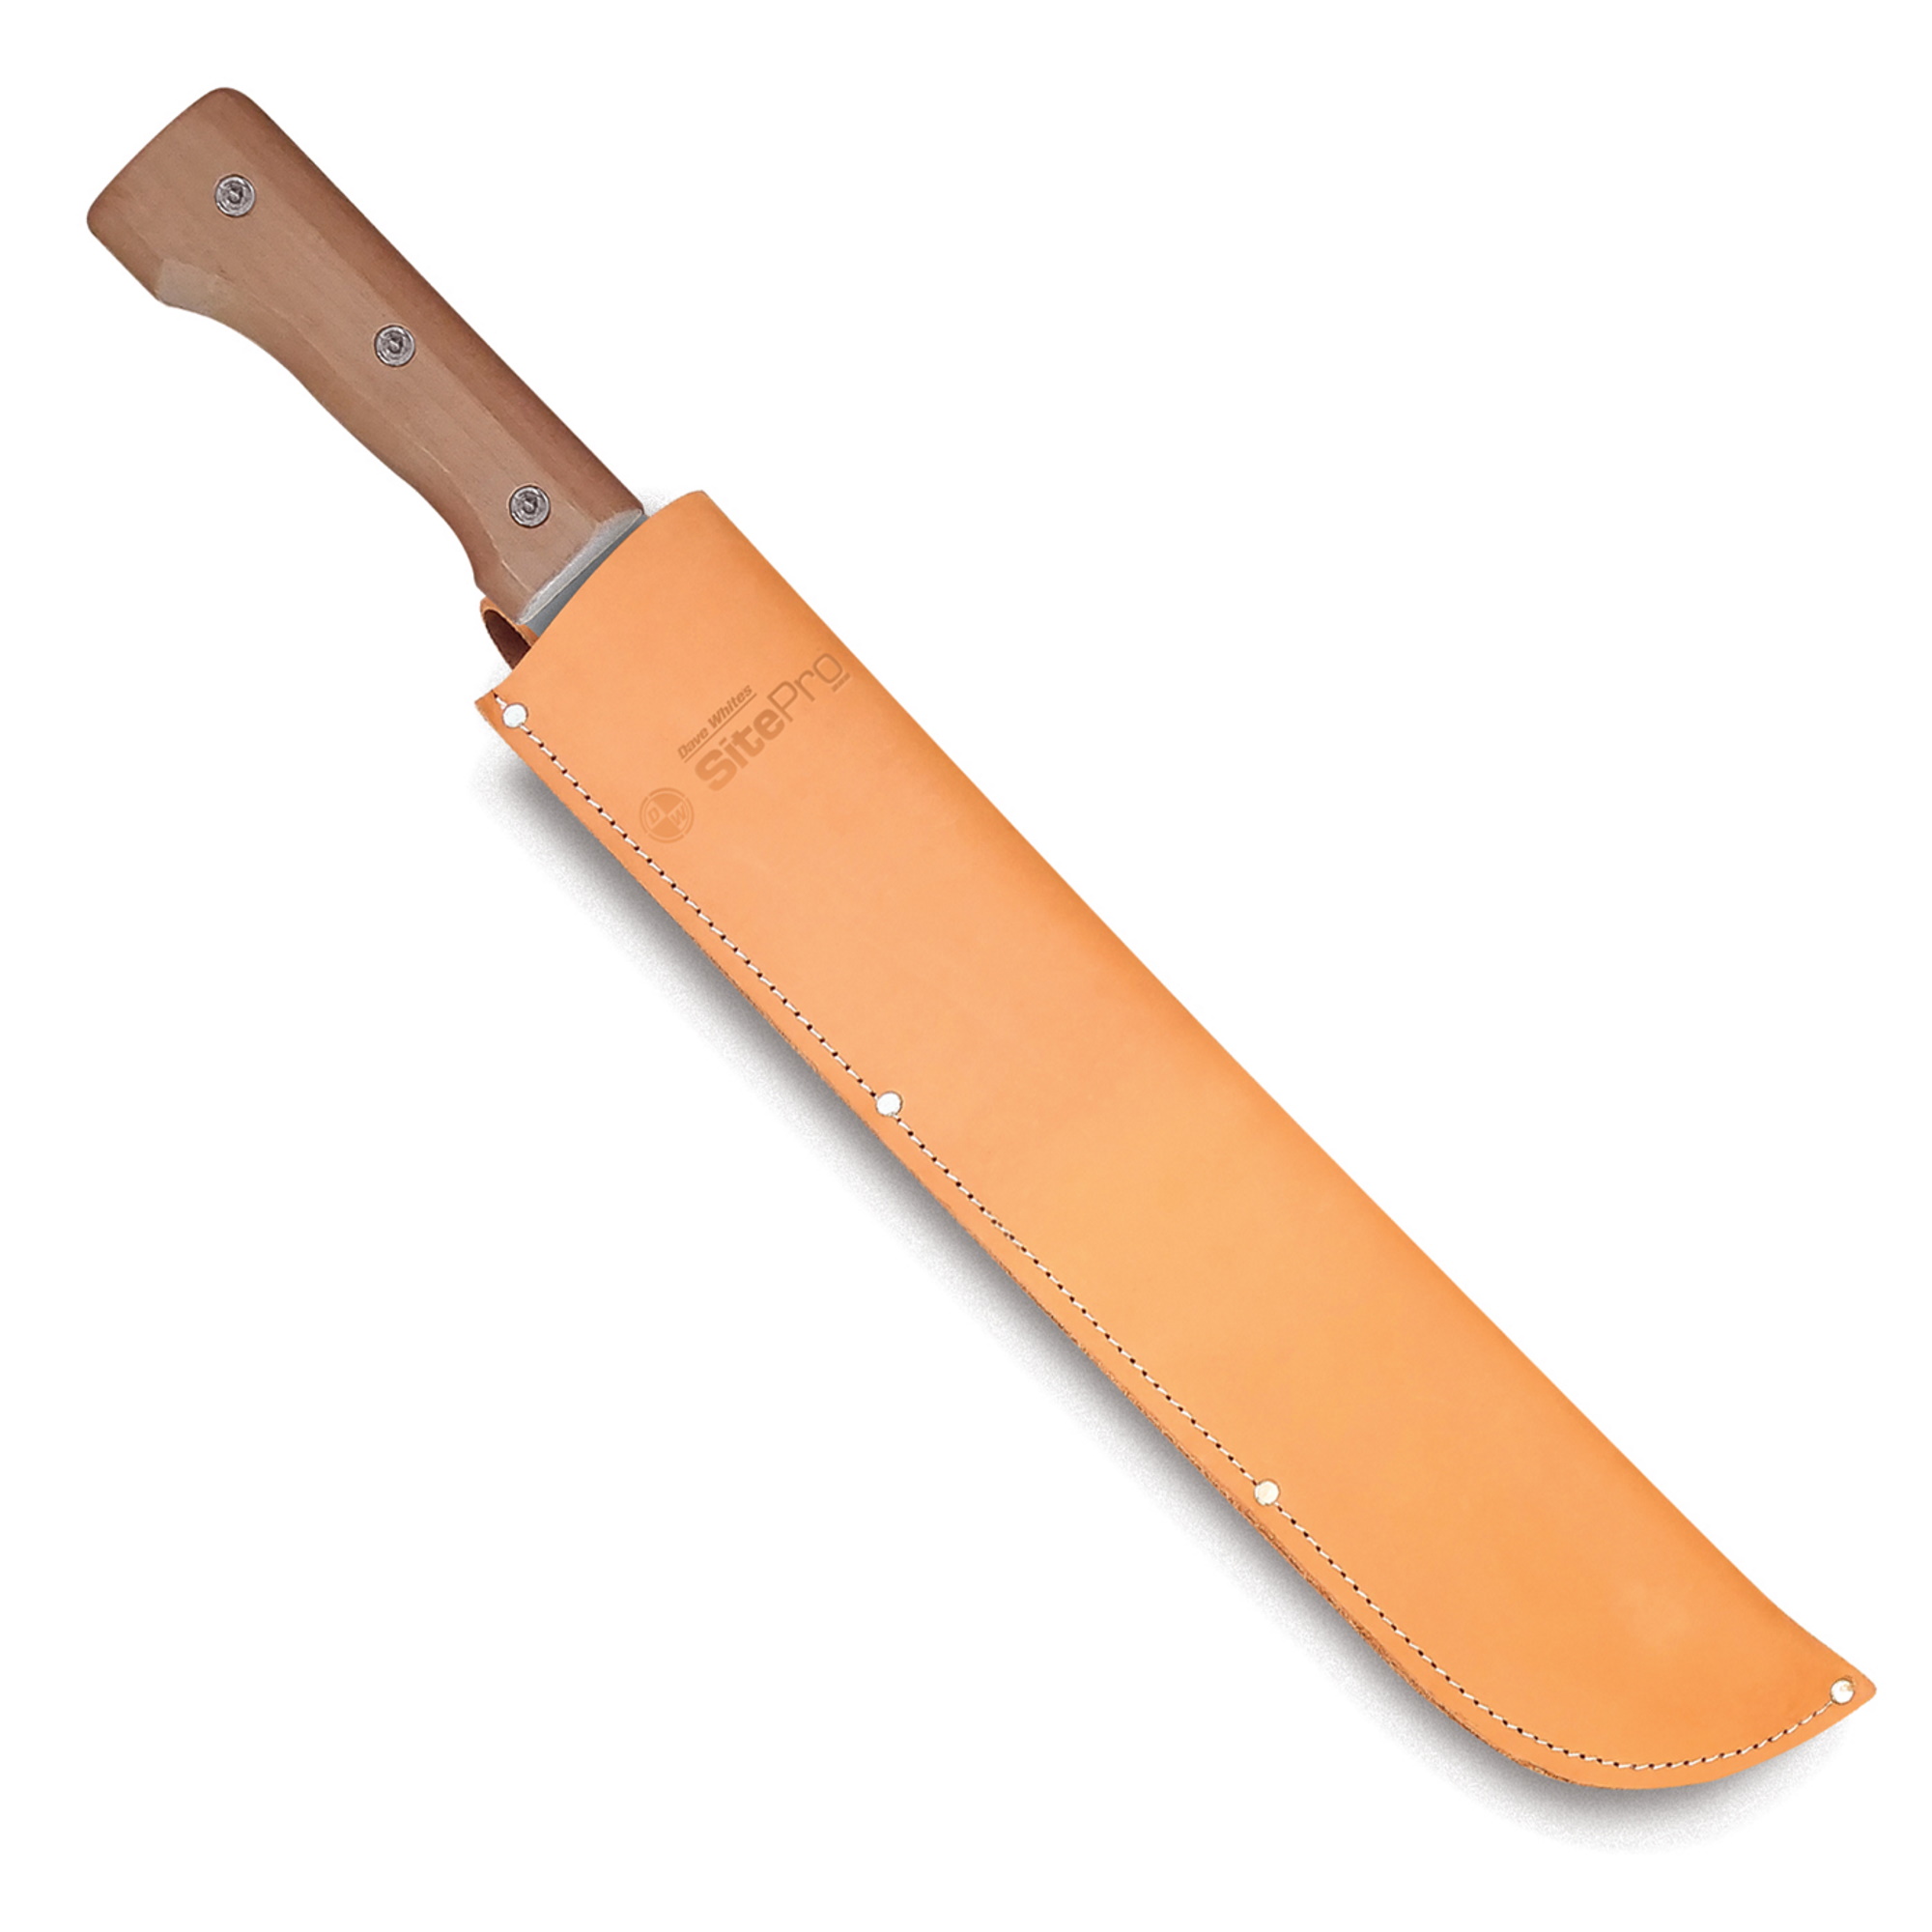 https://www.engineersupply.com/Images/SitePro-Land-Surveying-Equipment-Tools/ET12243-17-COLO18-LS-SitePro-Heavy-Duty-Machete-with-Wood-Handle-with-Leather-Sheath-additional1.jpg